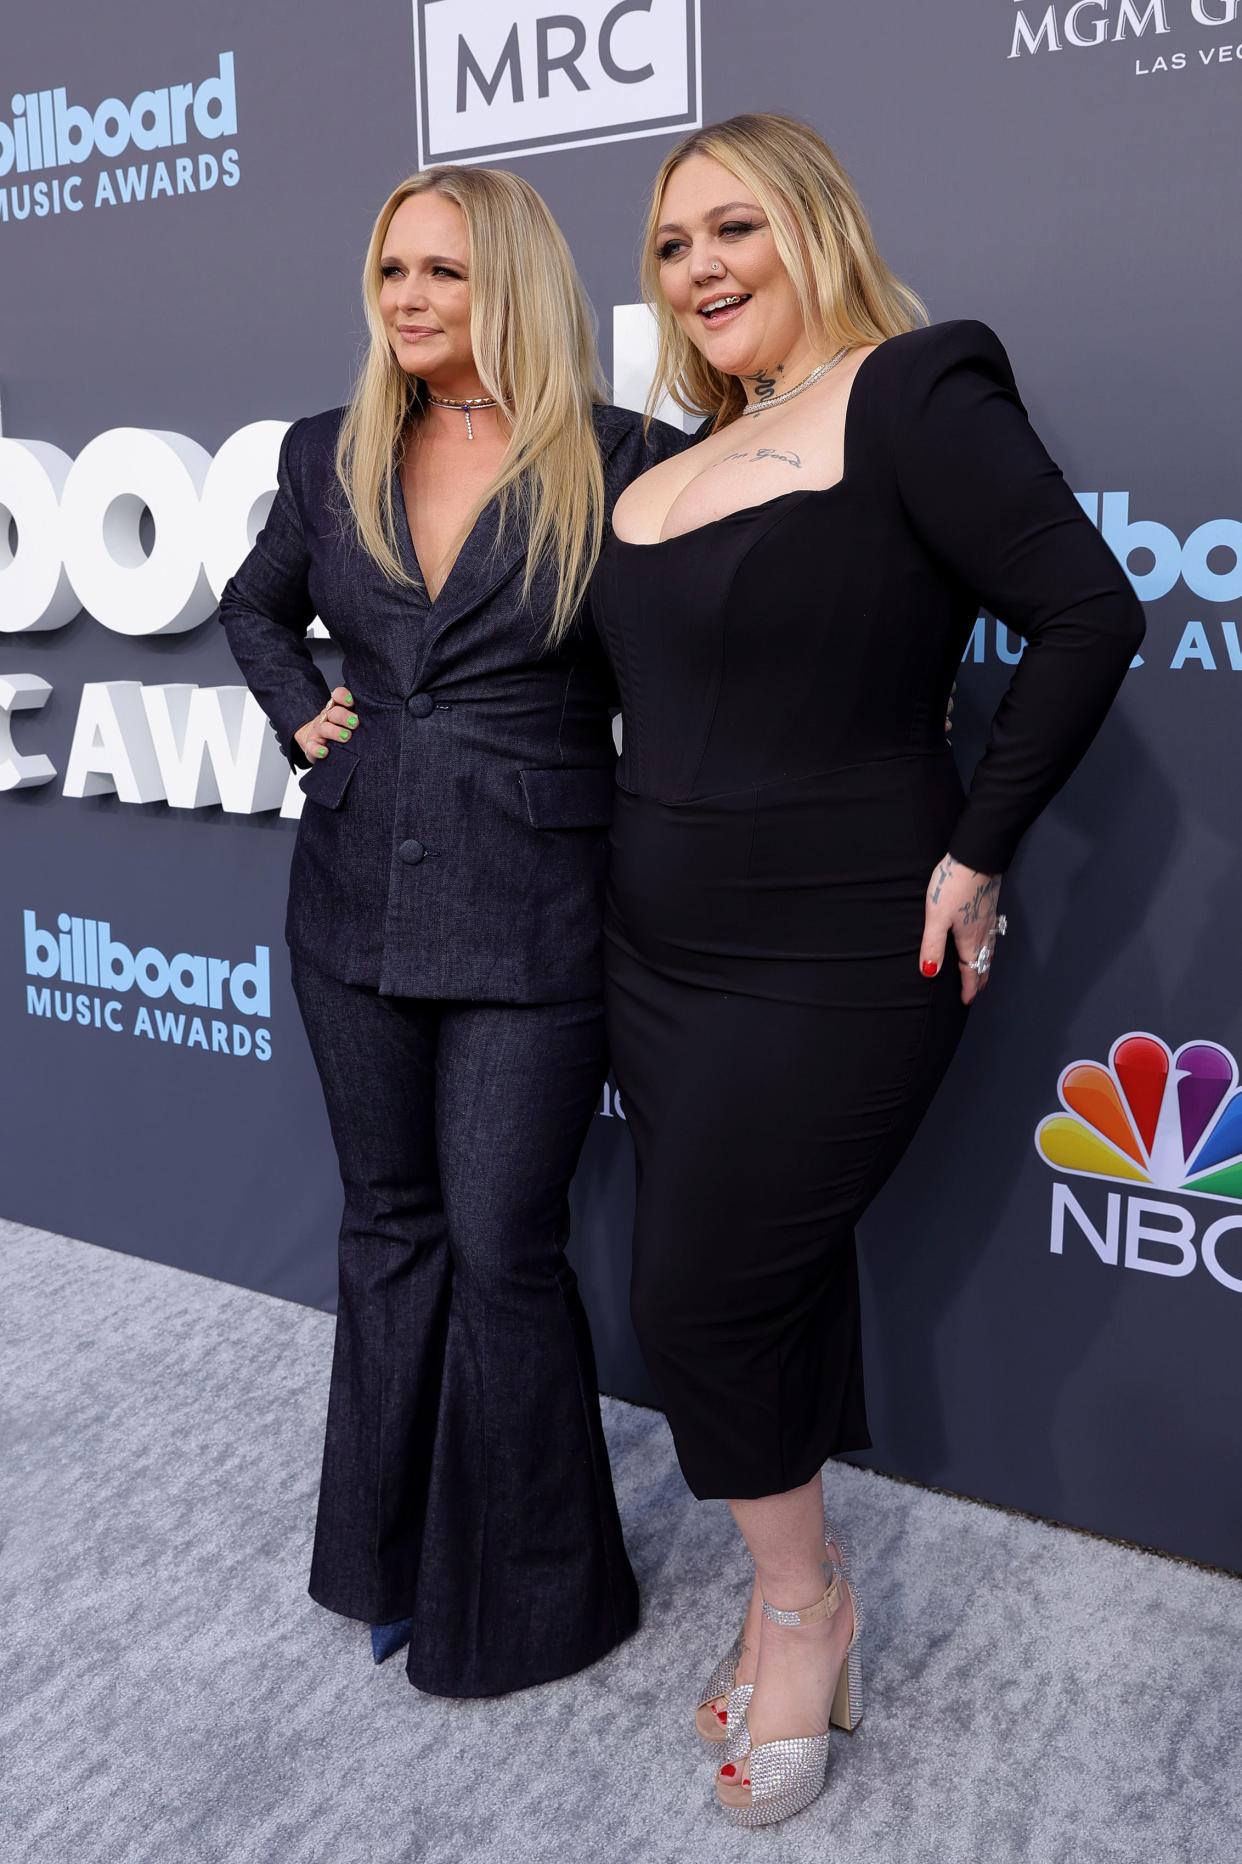 LAS VEGAS, NEVADA - MAY 15: (L-R) Miranda Lambert and Elle King attend the 2022 Billboard Music Awards at MGM Grand Garden Arena on May 15, 2022 in Las Vegas, Nevada. (Photo by Amy Sussman/Getty Images for MRC)